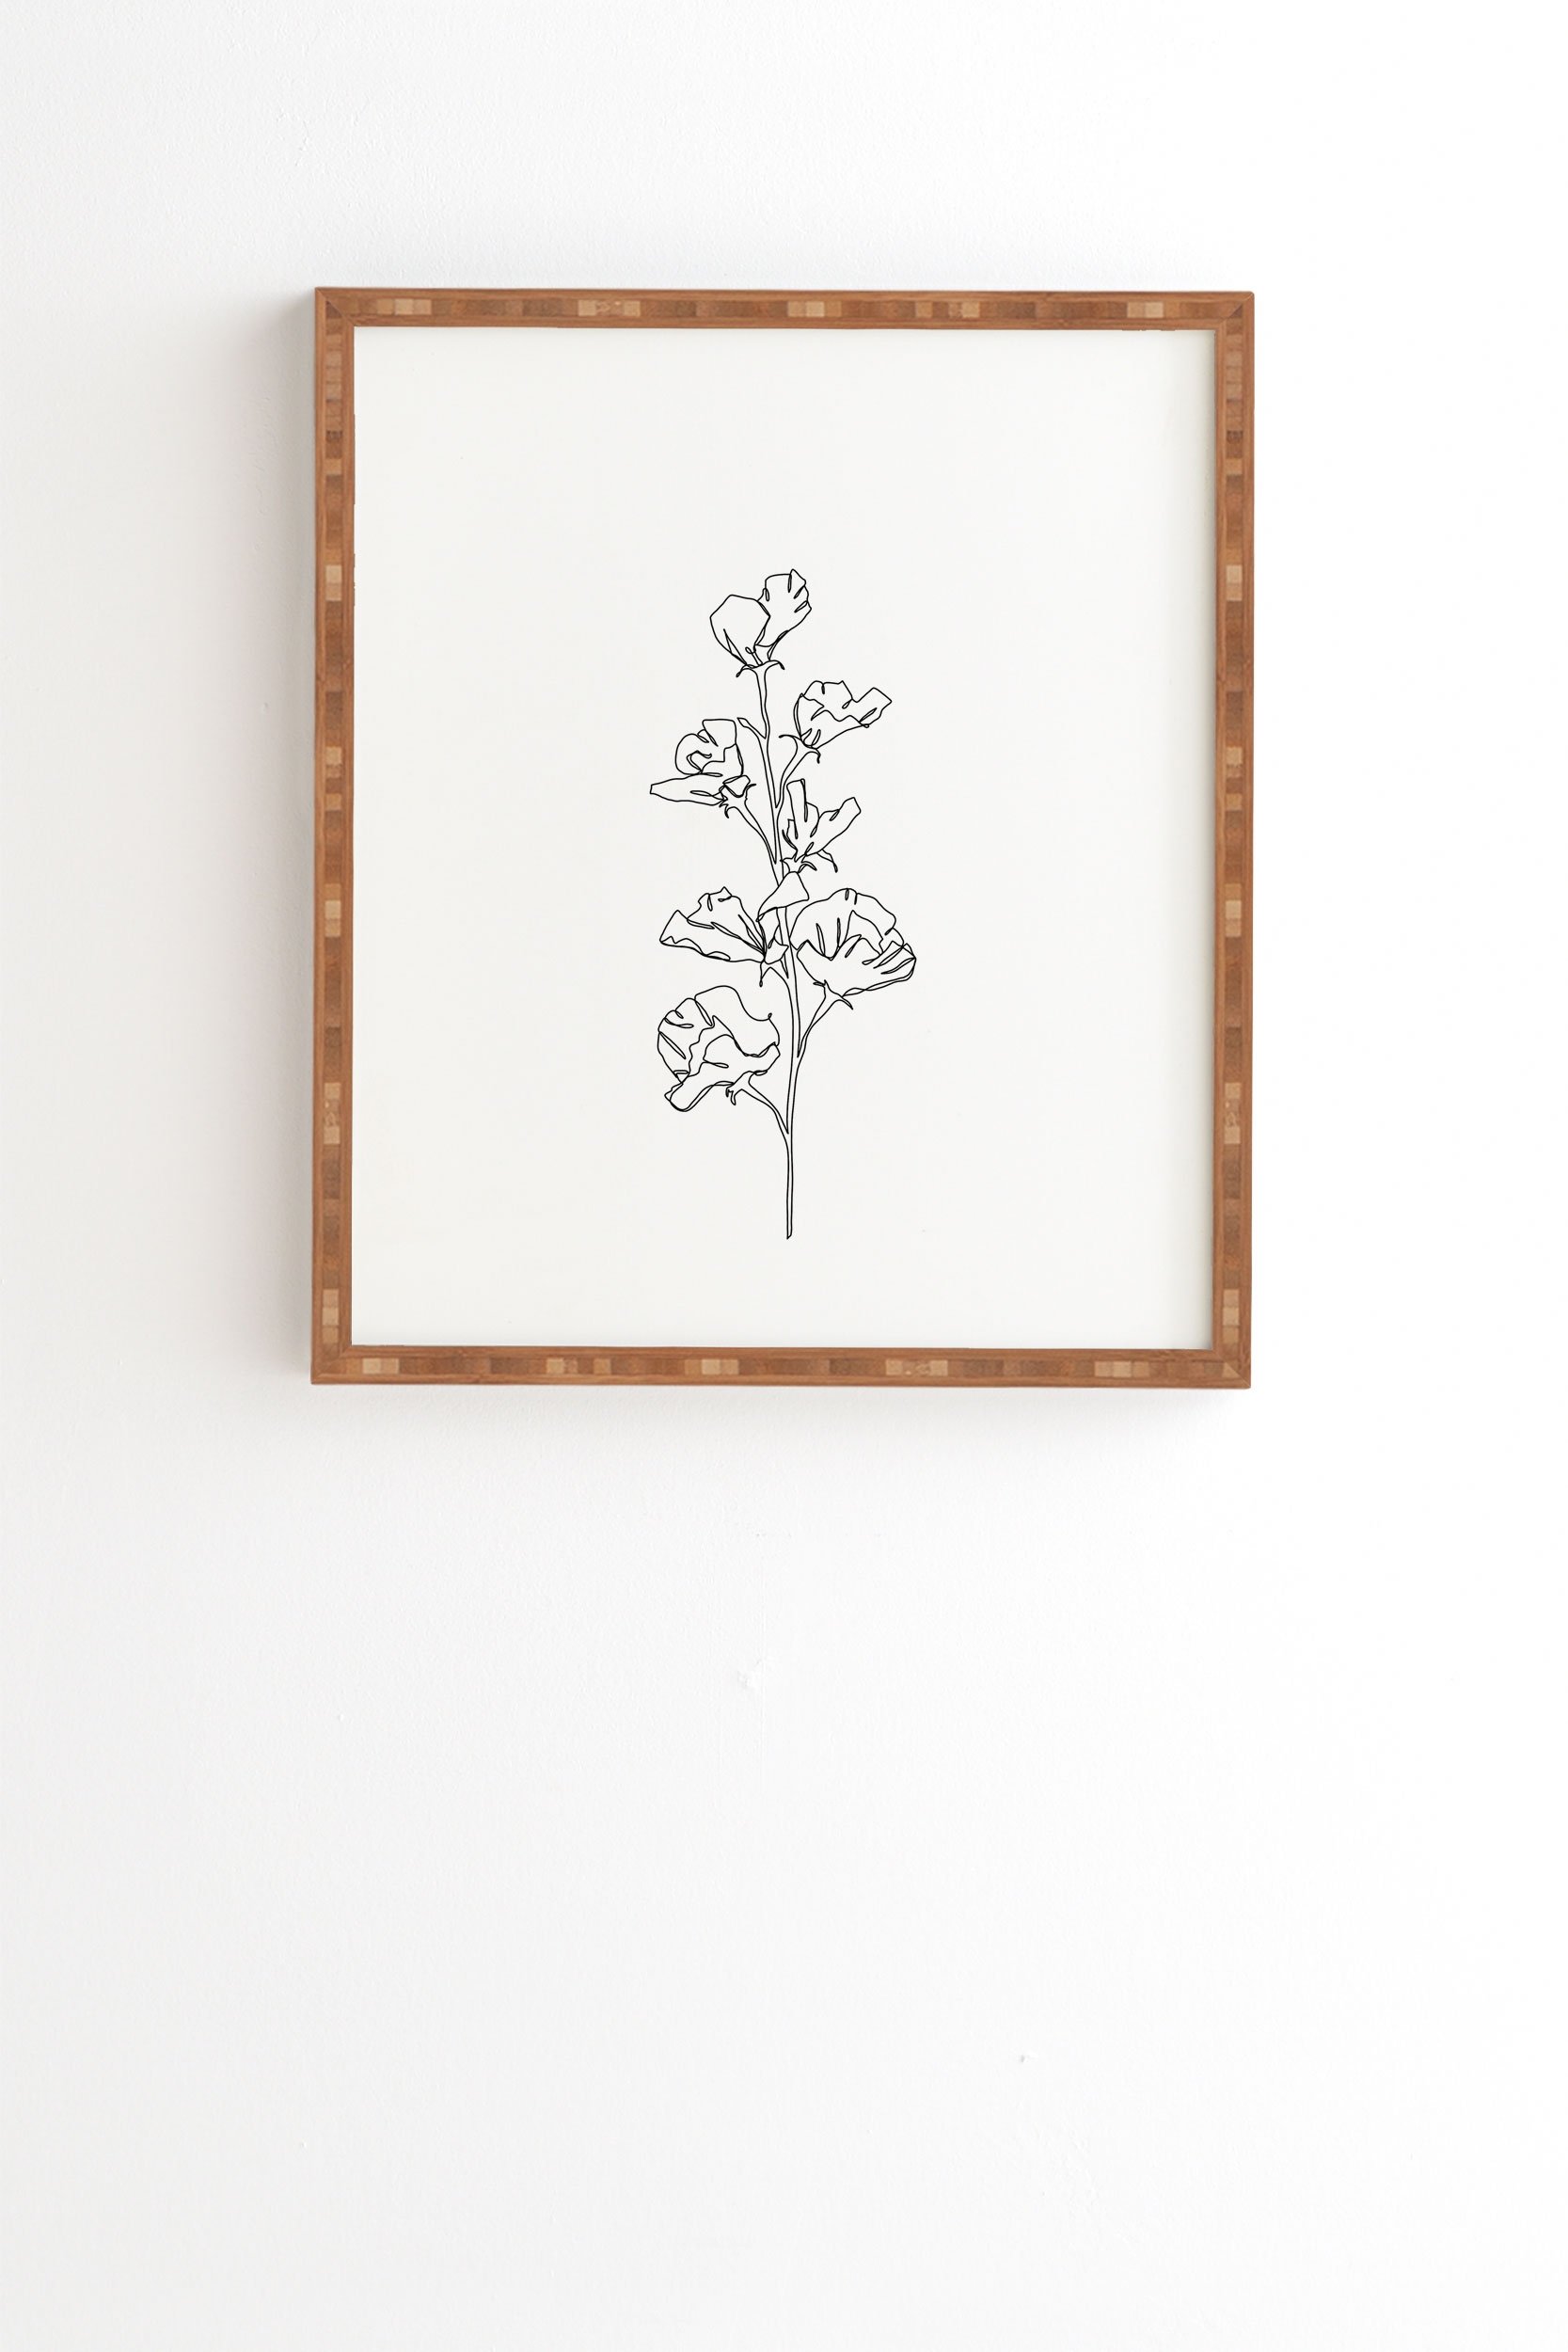 Cotton Flower Illustration by The Colour Study - Framed Wall Art Bamboo 8" x 9.5" - Image 0